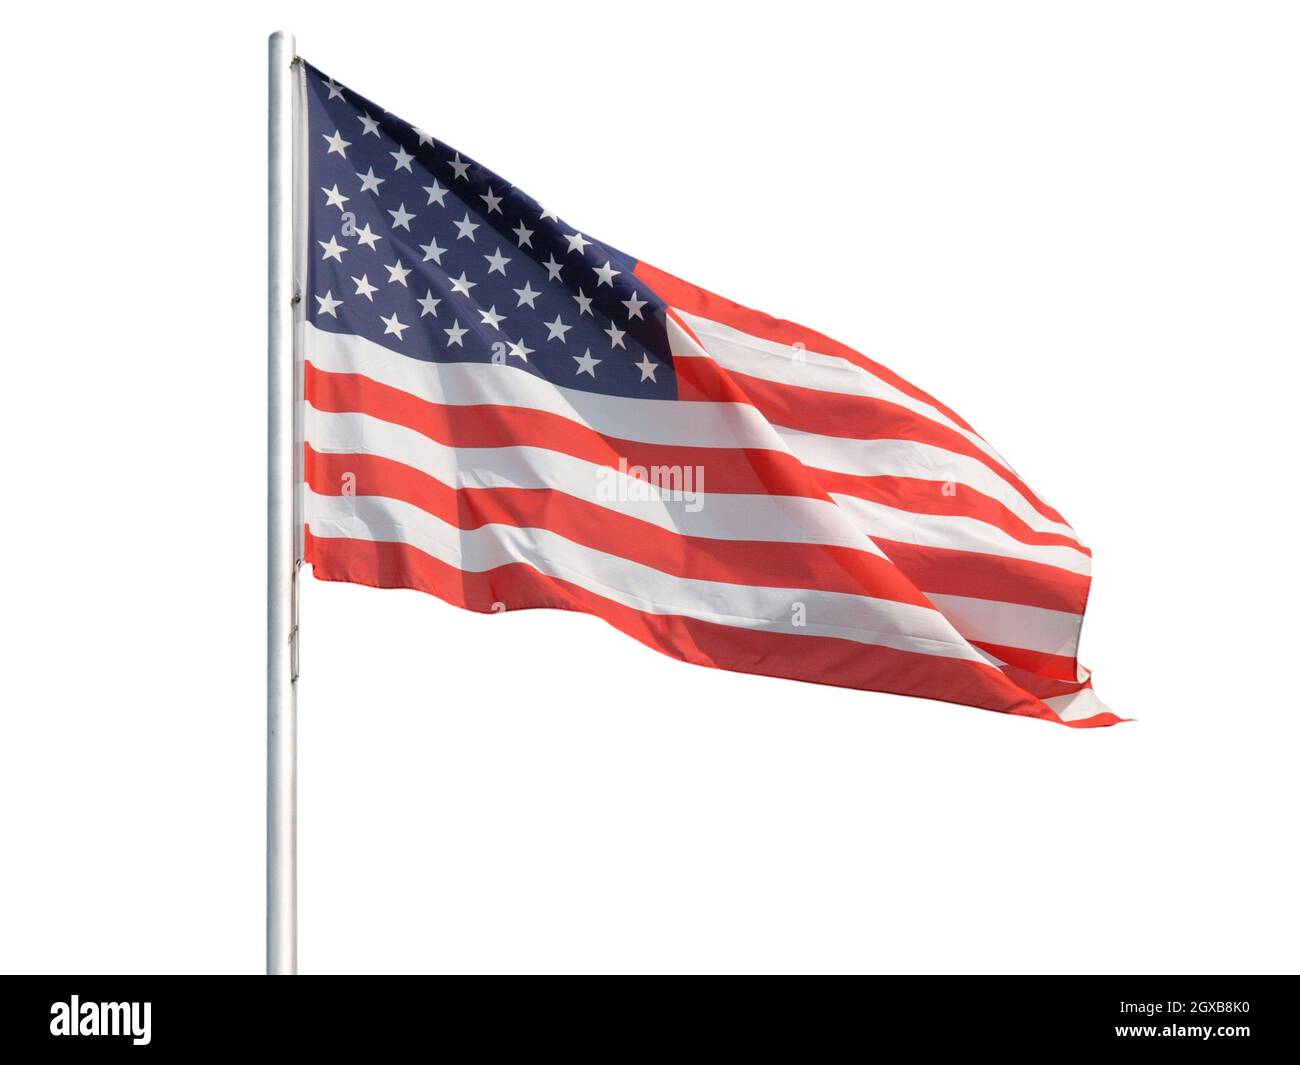 Flag of the USA (United States of America). Stock Photo